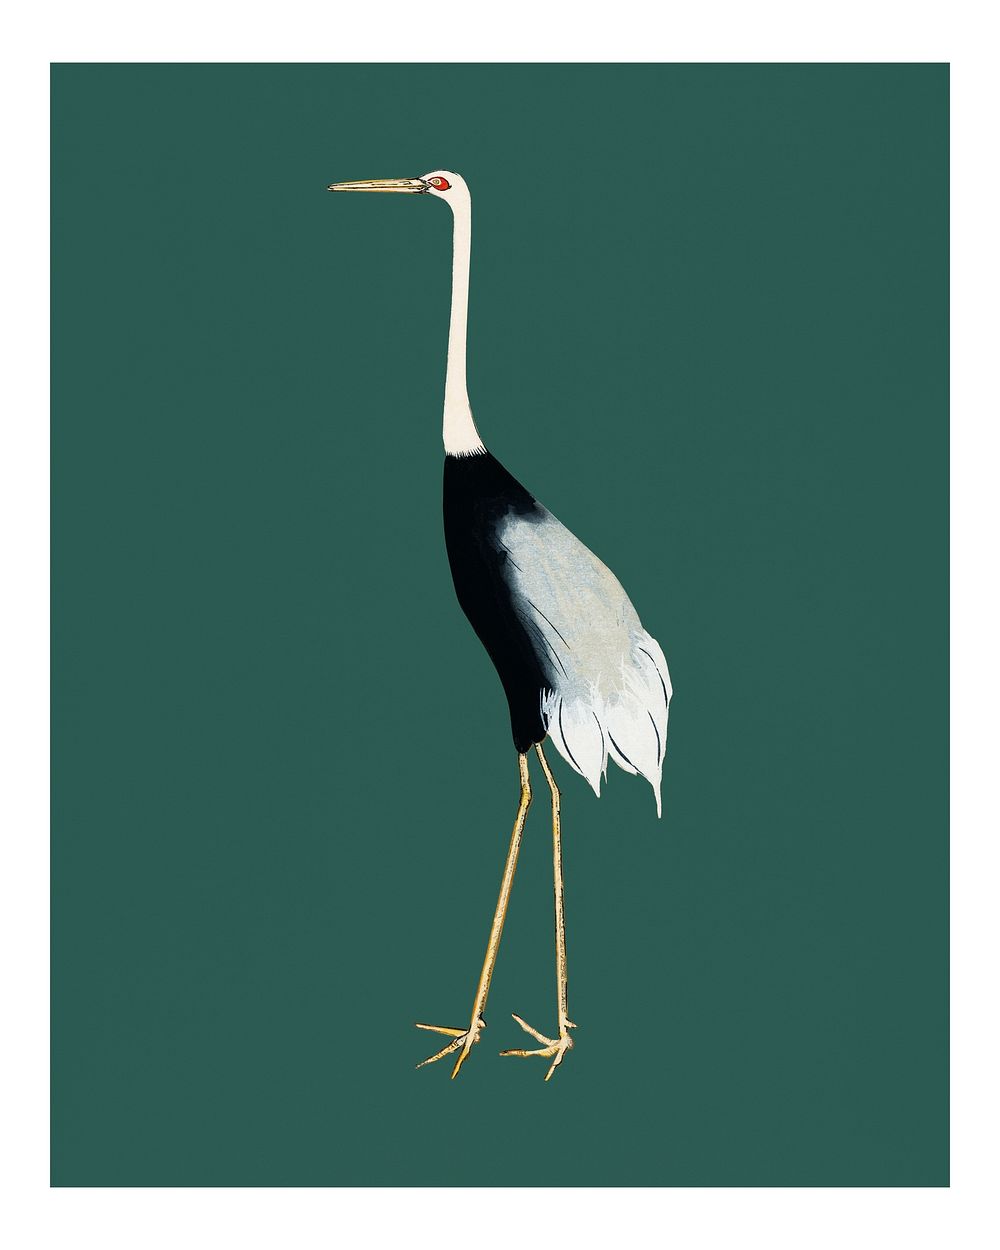 Vintage red crown crane illustration wall art print and poster.